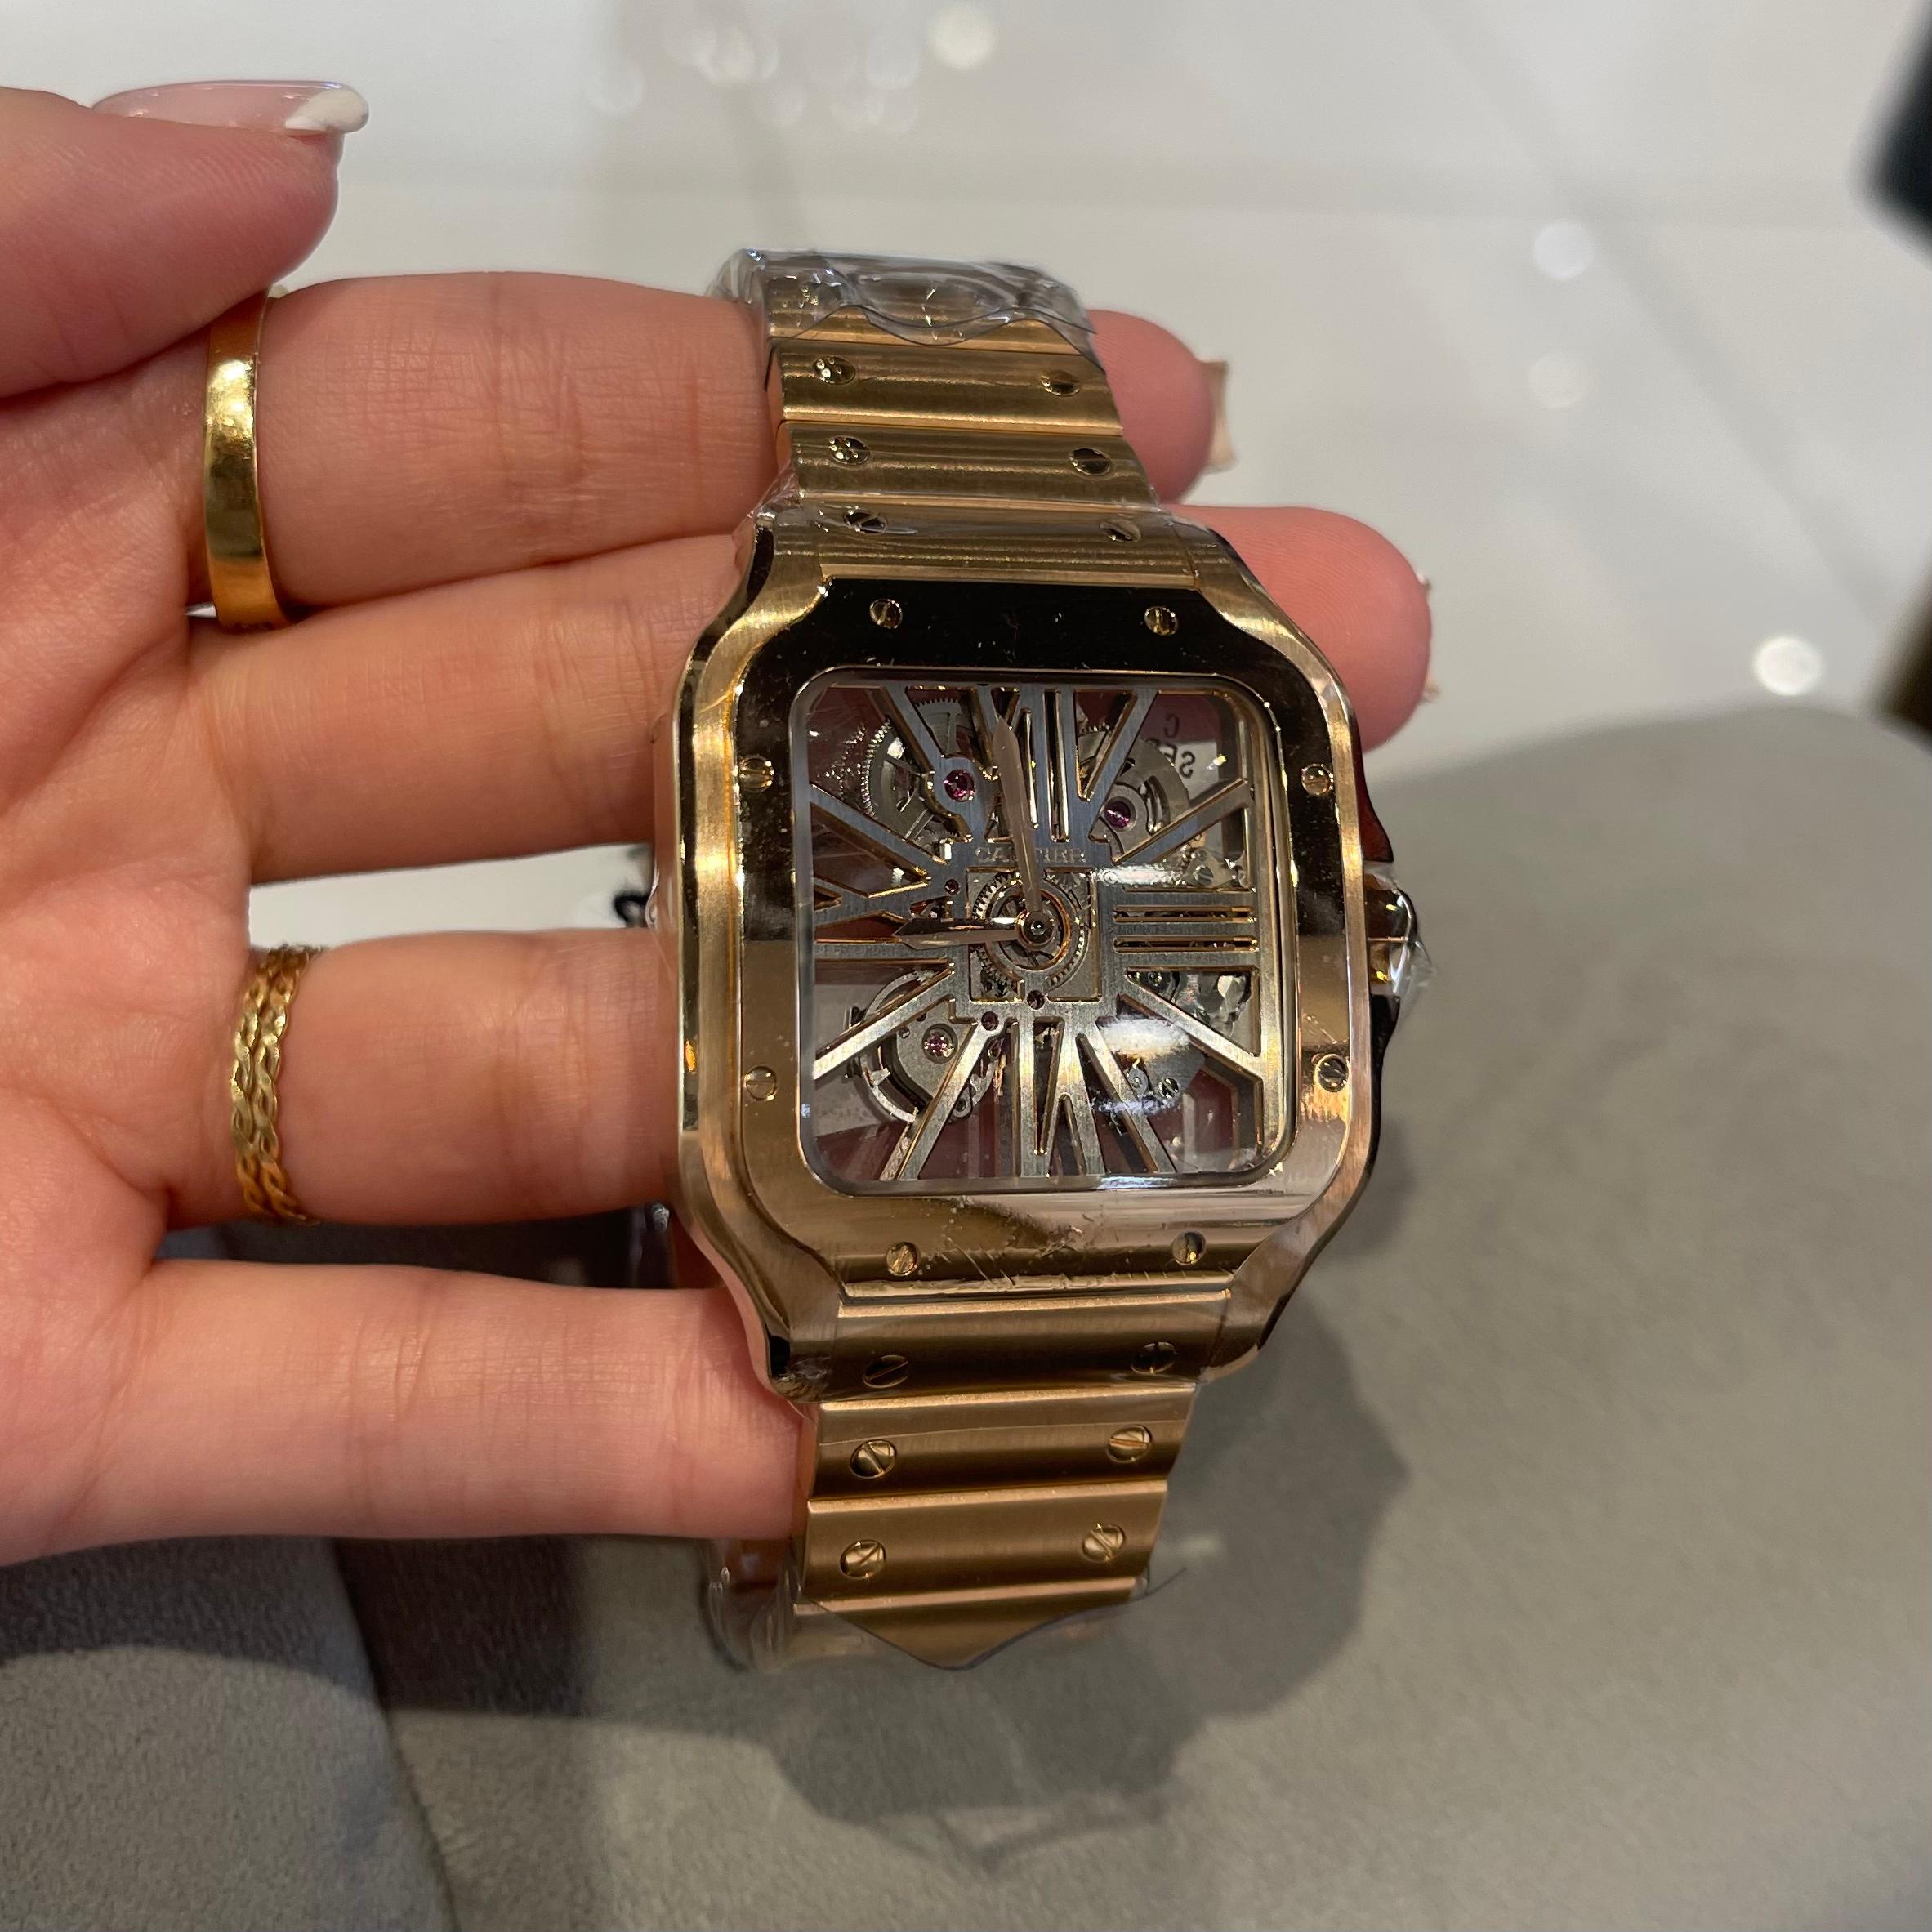 Brand: Cartier

Style: Large Skeleton Watch

Model Name: Santos De Cartier

Model Number: WHSA0016

Movement: Hand-Wound Mechanical Movement

Case Size: 39.7 mm

Year: 2021

Dial Color:  Clear​​​​​​​

Case Material: 18K Rose Gold

Hour Markers: